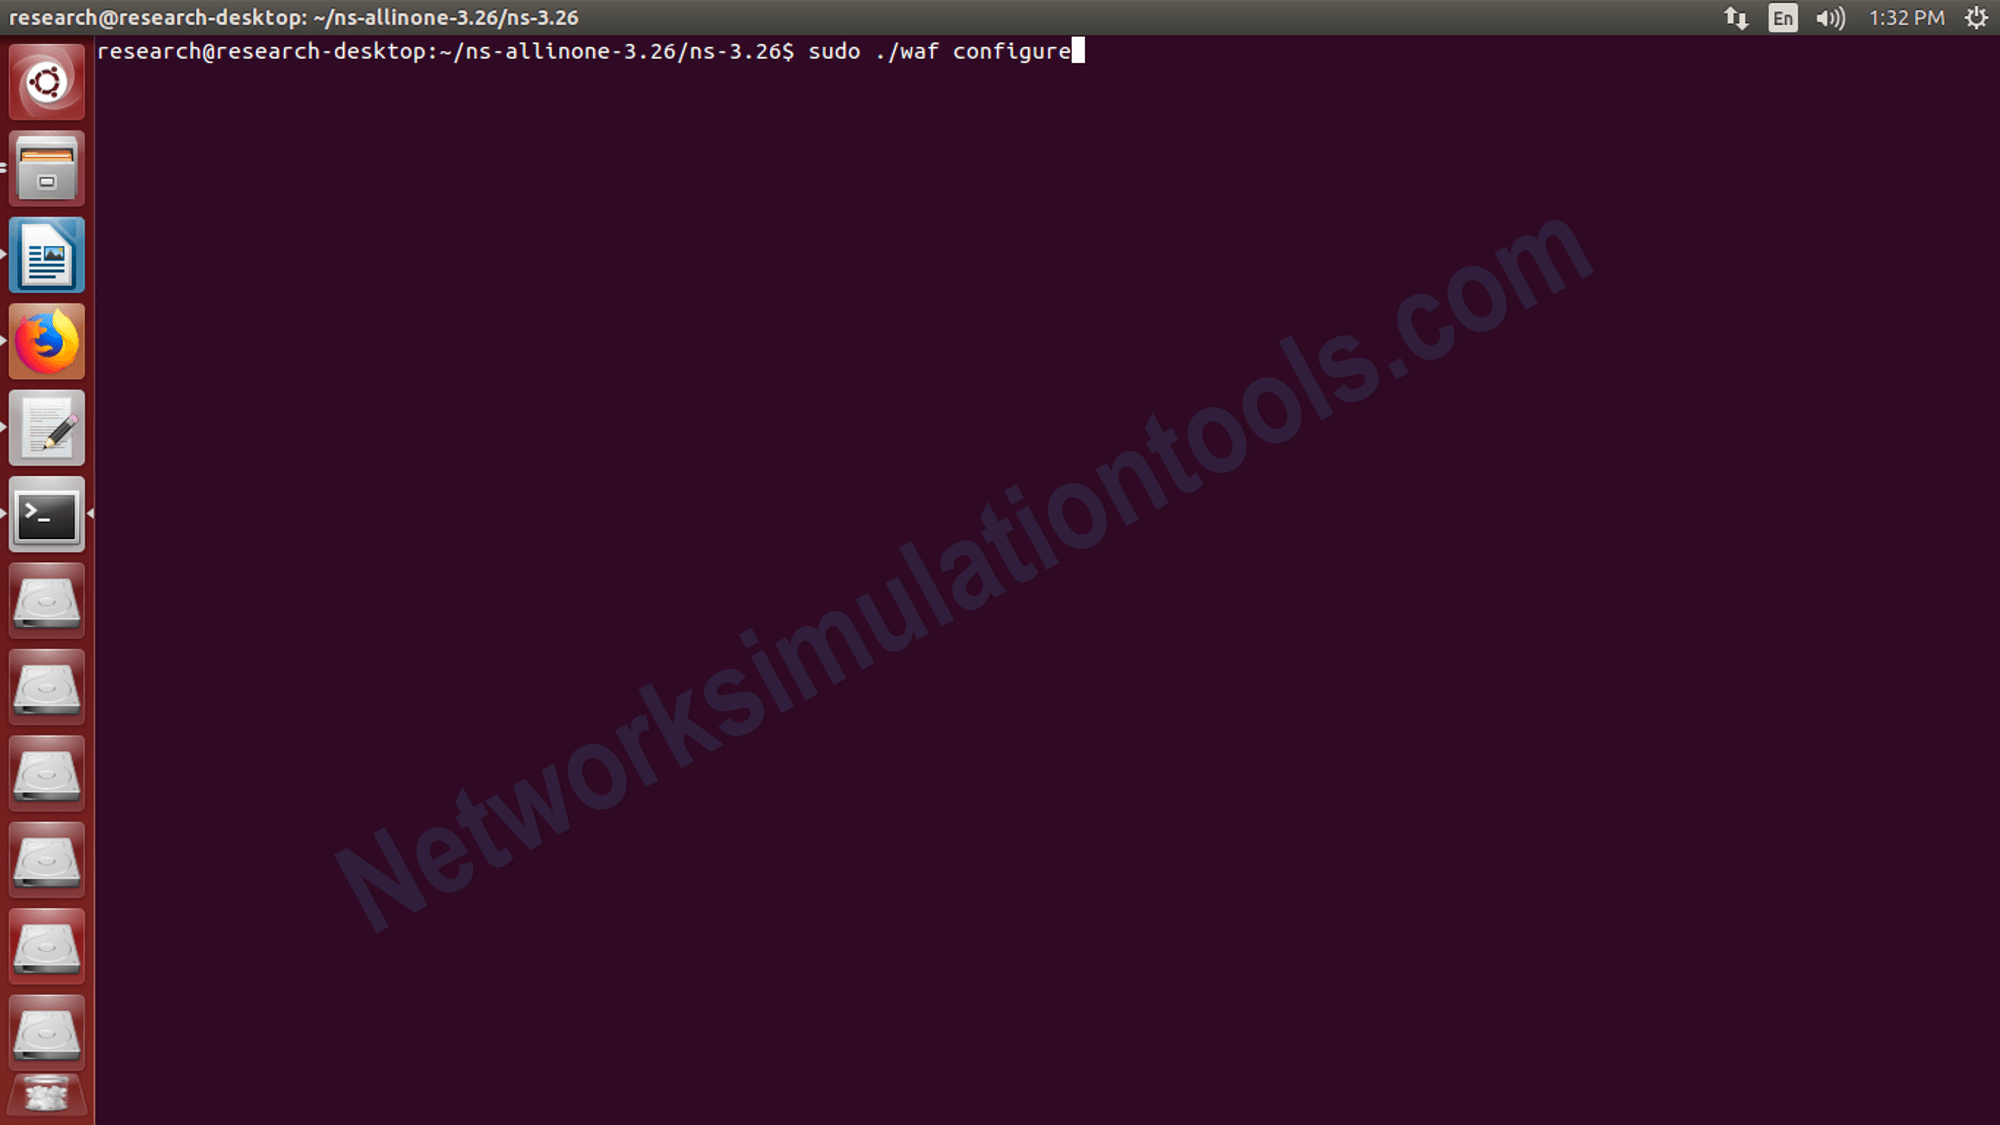 Configure the package NS-allinone installation location